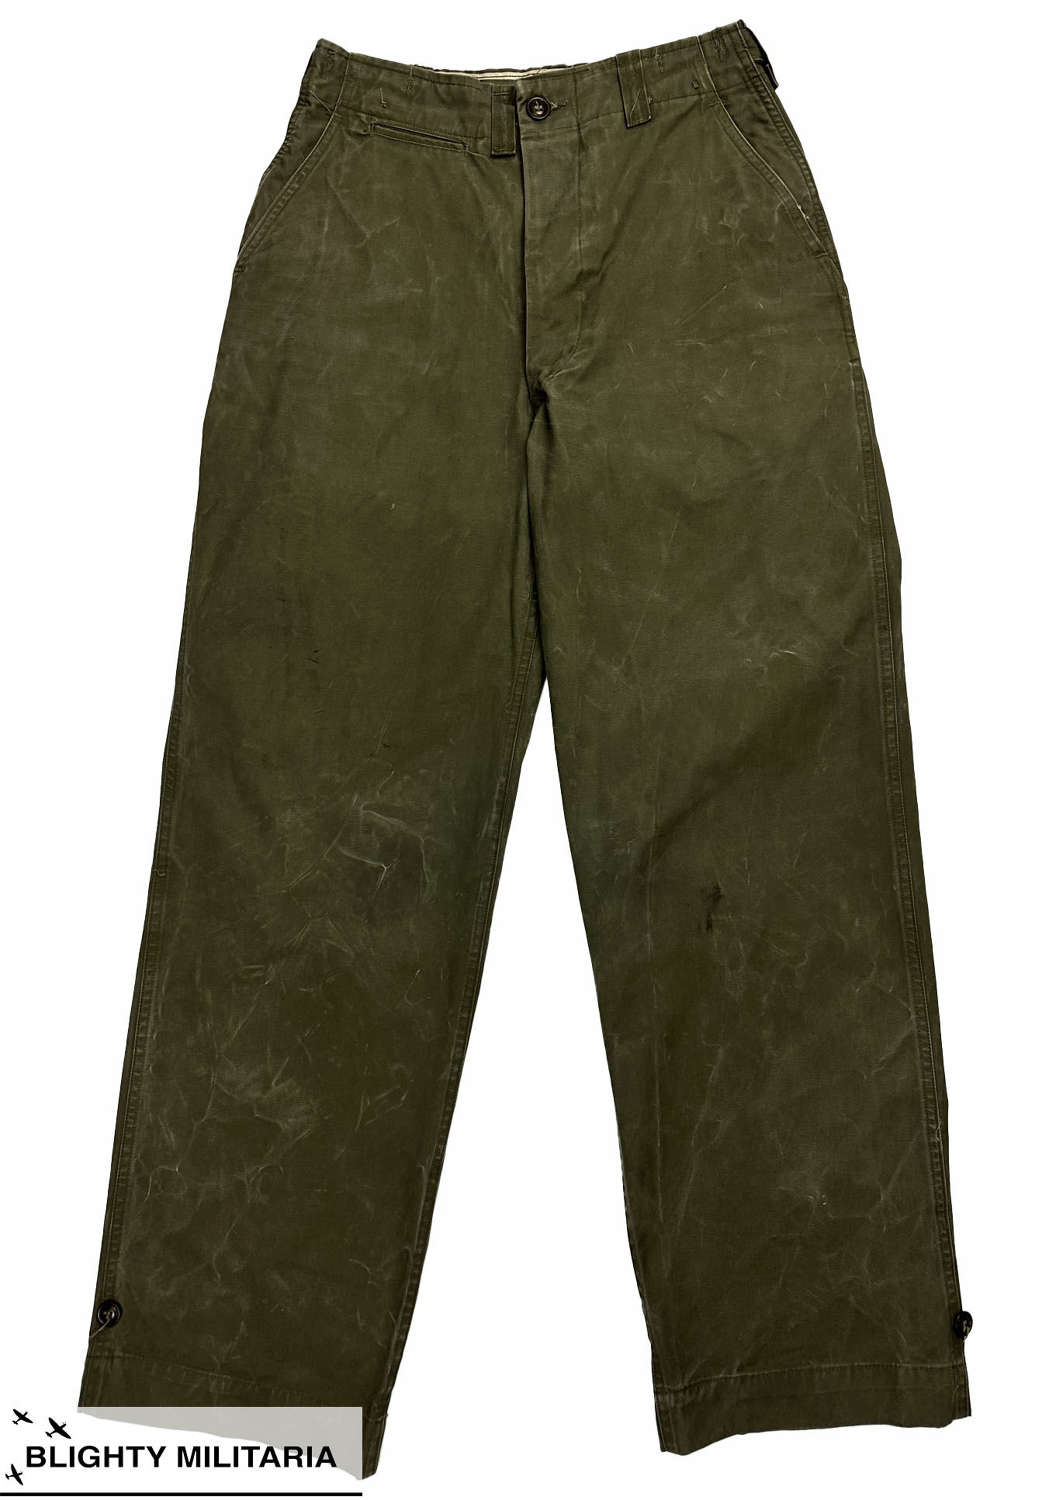 Original 1950 Dated US Army M1943 Combat Trousers - Size 28x32